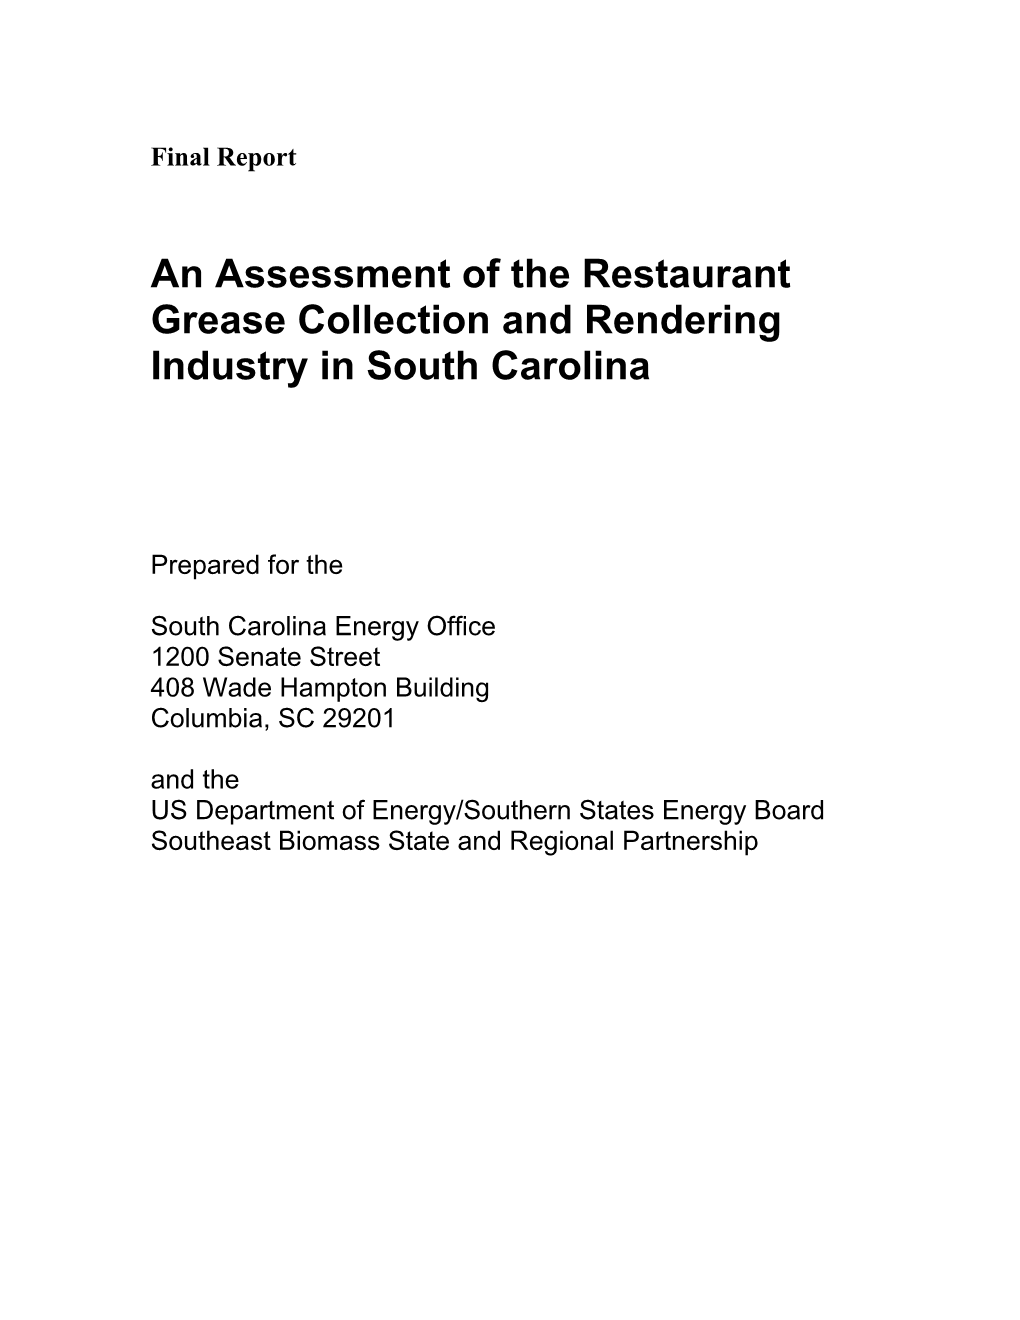 An Assessment of the Restaurant Grease Collection and Rendering Industry in South Carolina